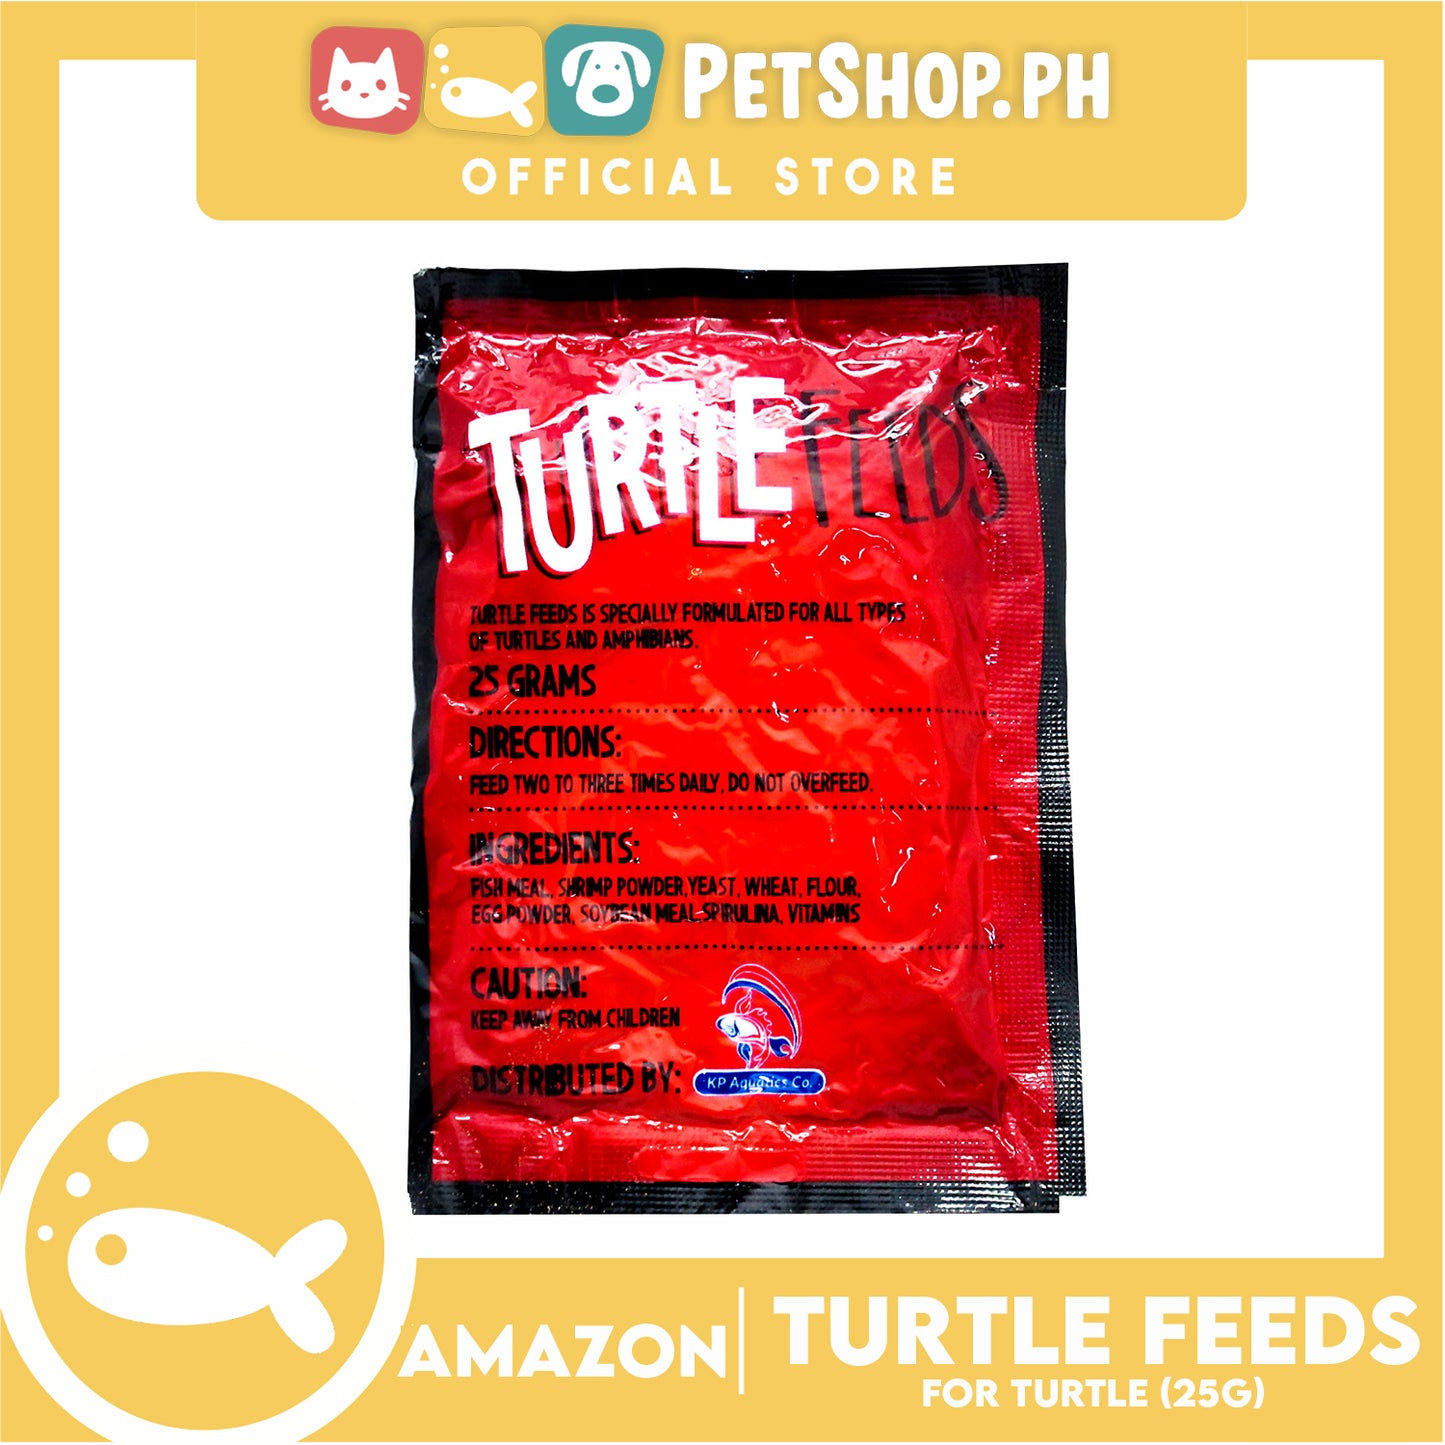 Amazon Turtle Food 25g with board